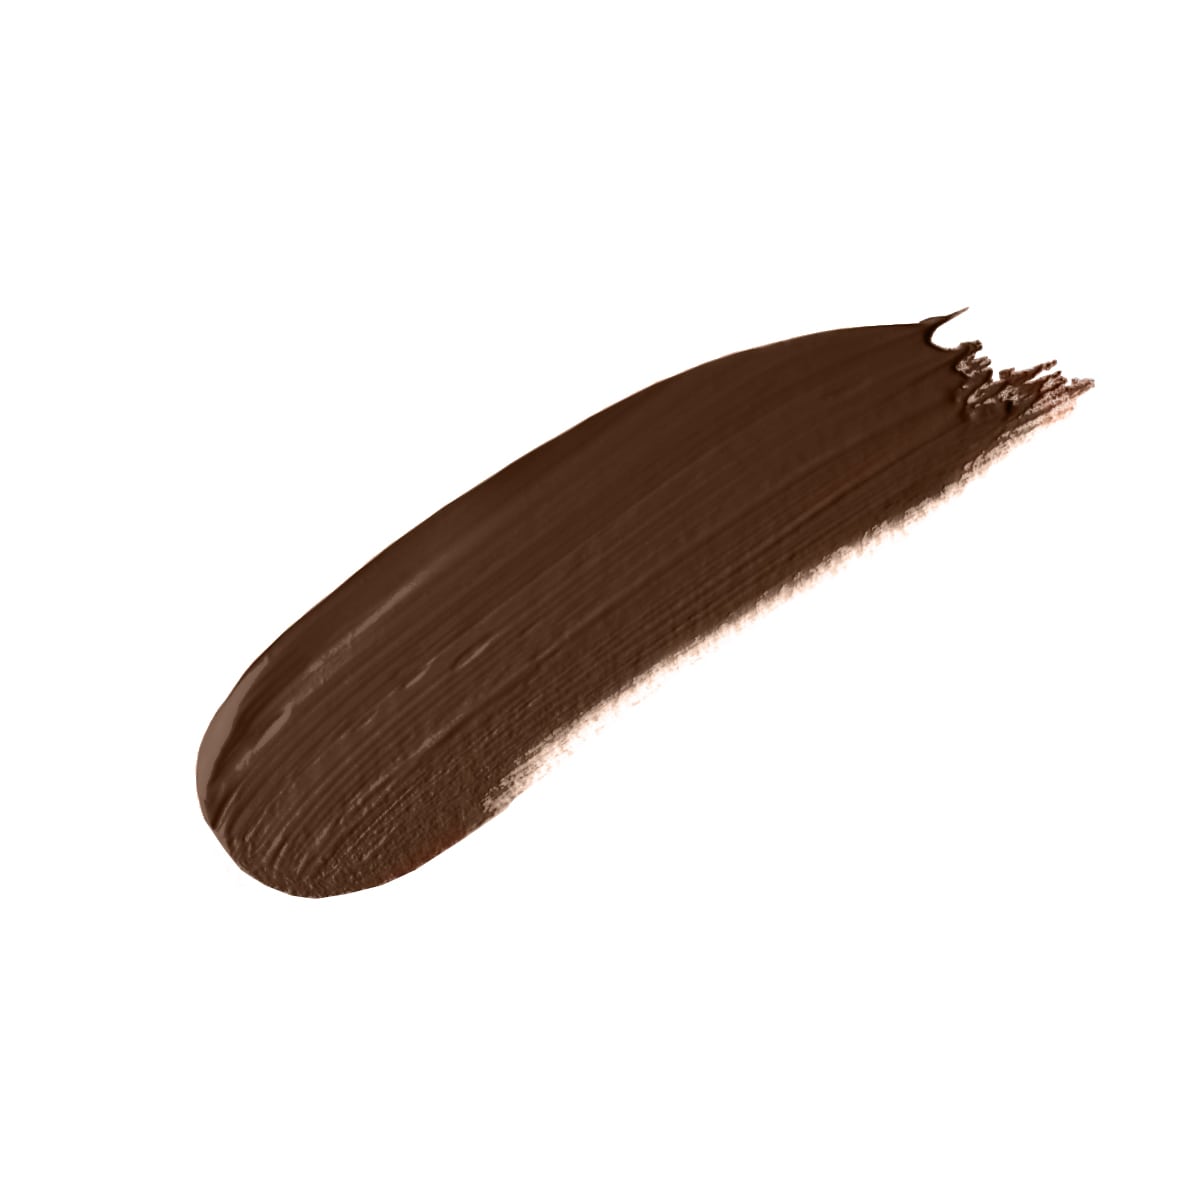 10 - DEEP CHOCOLATE - buildable, creamy, hydrating concealer in chocolate undertone shade ten